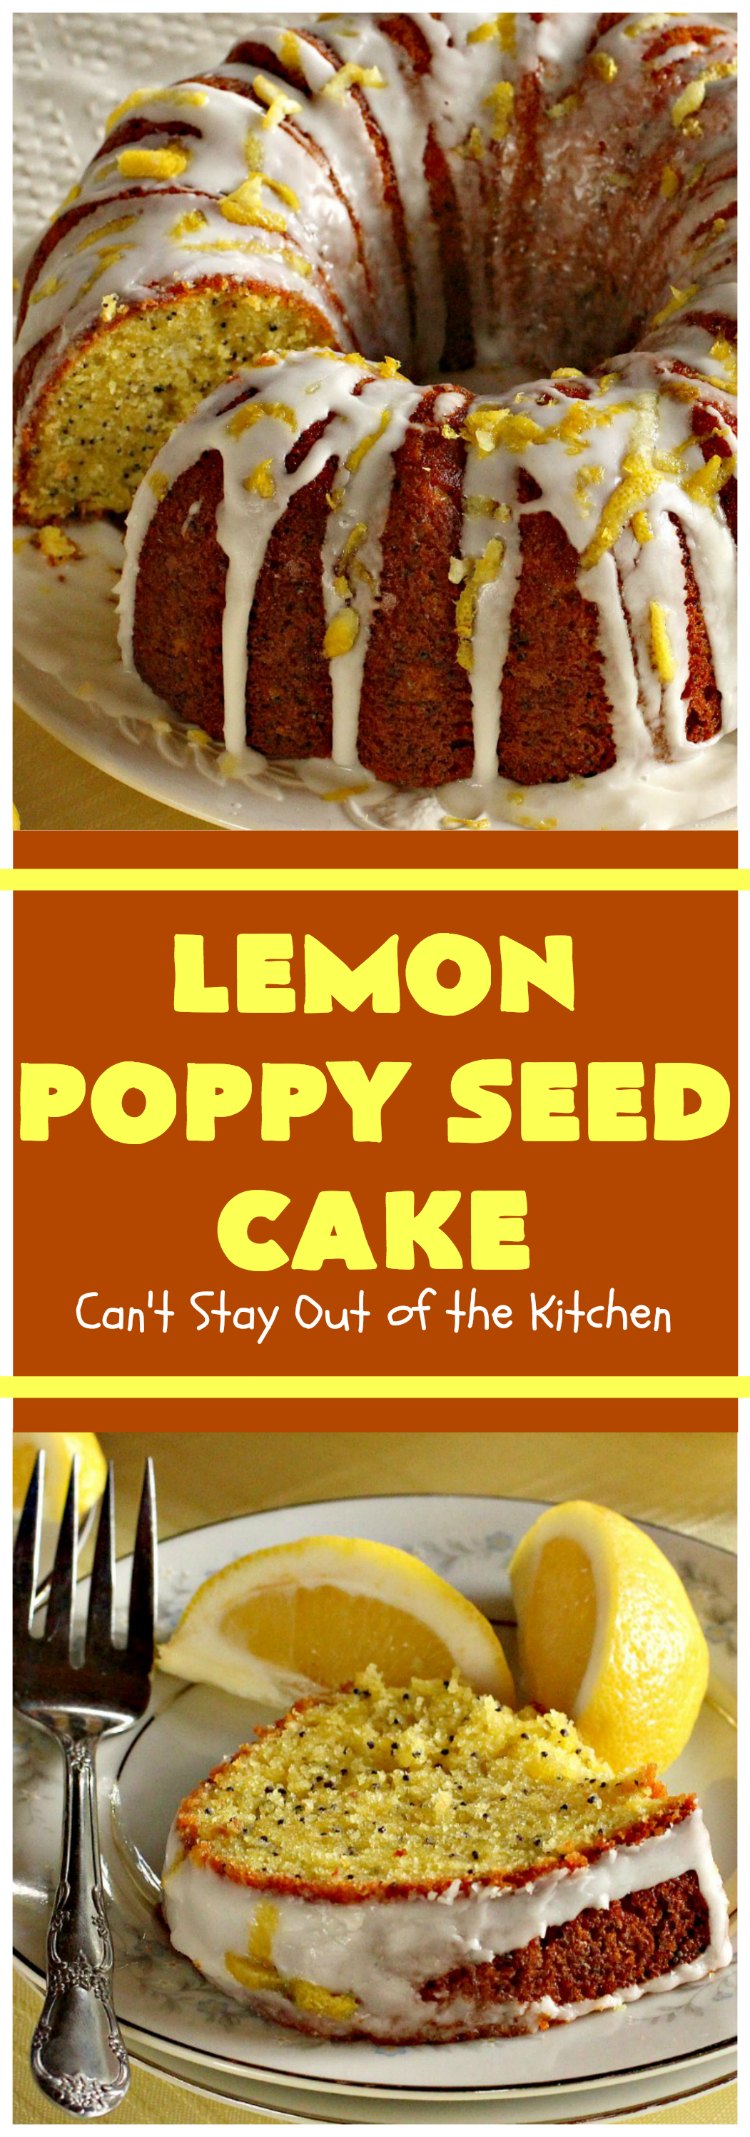 Lemon Poppy Seed Cake | Can't Stay Out of the Kitchen